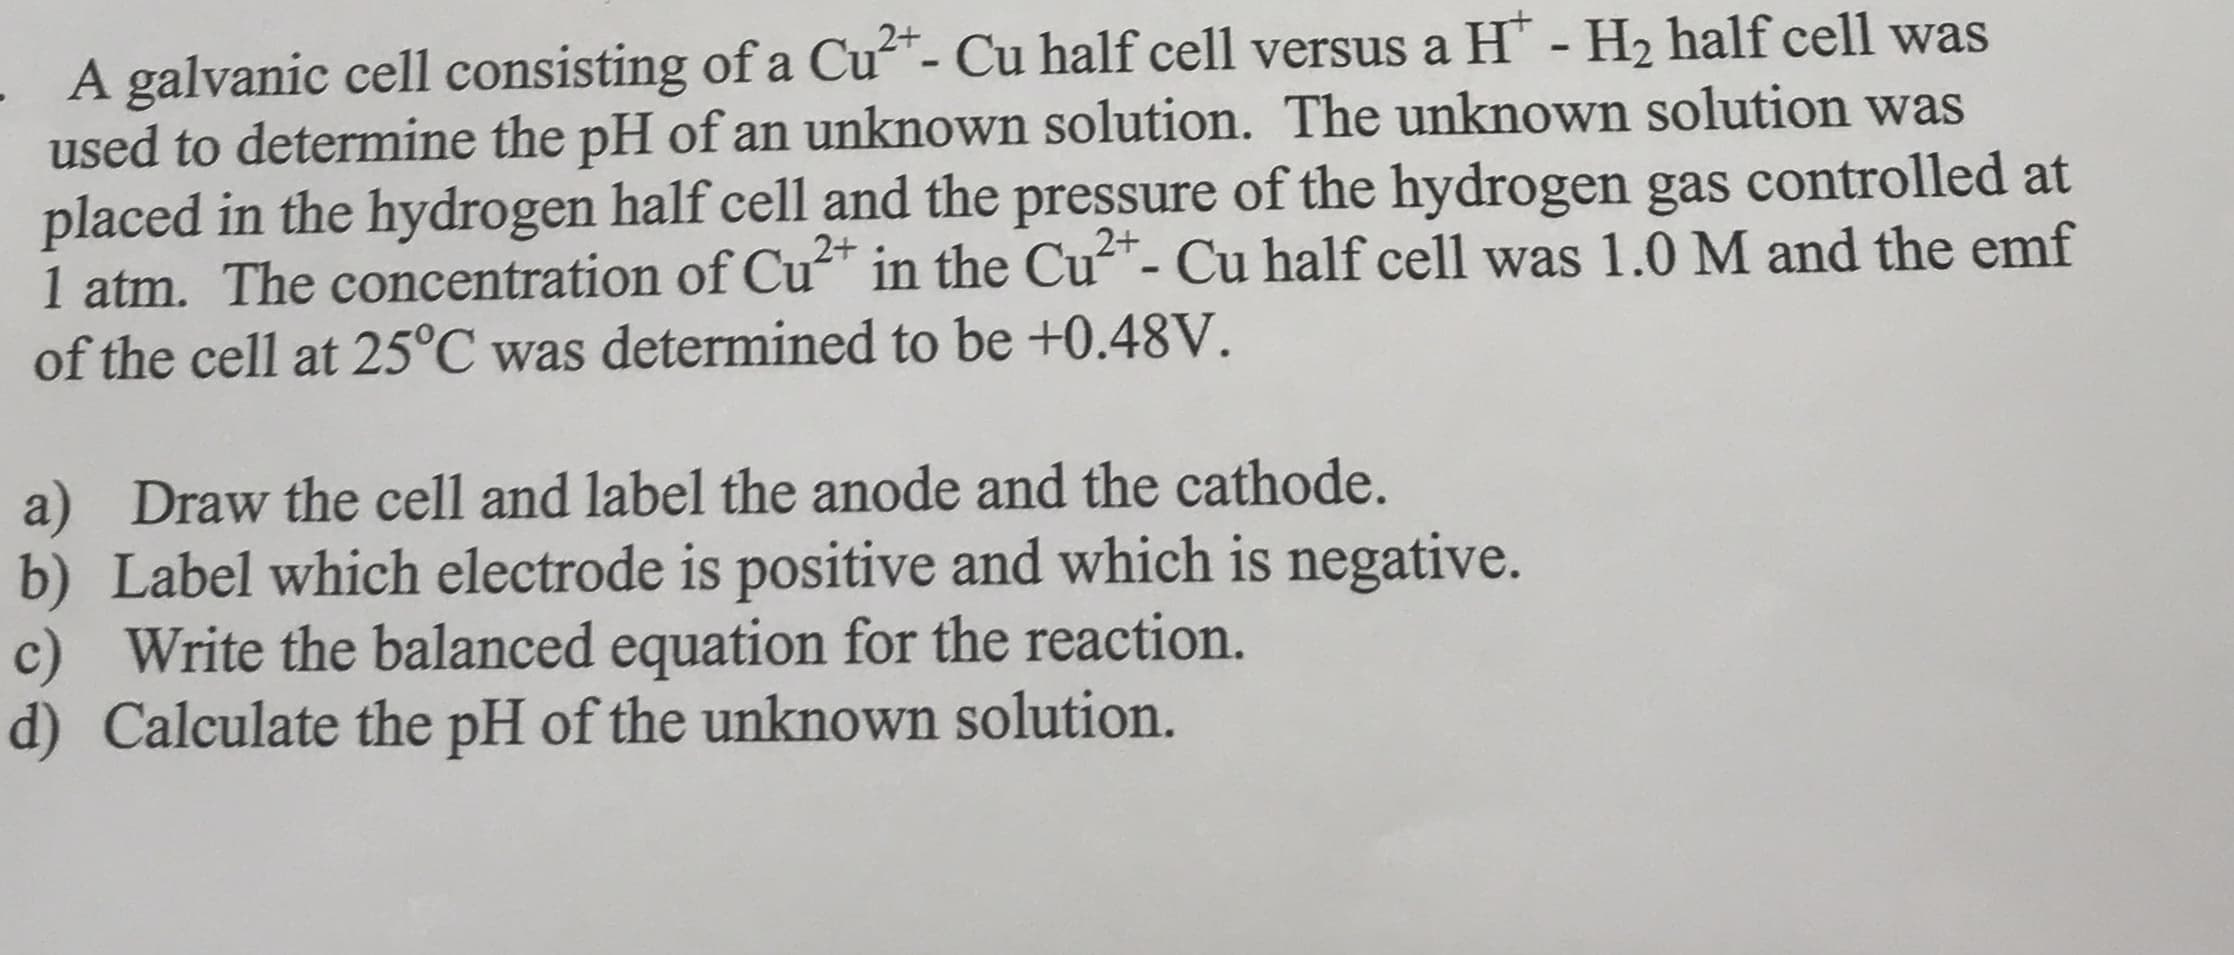 2+
- A galvanic cell consisting of a Cu- Cu half cell versus a H - H2 half cell was
used to determine the pH of an unknown solution. The unknown solution was
placed in the hydrogen half cell and the pressure of the hydrogen gas controlled at
1 atm. The concentration of Cu in the Cu"- Cu half cell was 1.0 M and the emf
of the cell at 25°C was determined to be +0.48V.
2+
2+
%3
a) Draw the cell and label the anode and the cathode.
b) Label which electrode is positive and which is negative.
c) Write the balanced equation for the reaction.
d) Calculate the pH of the unknown solution.
